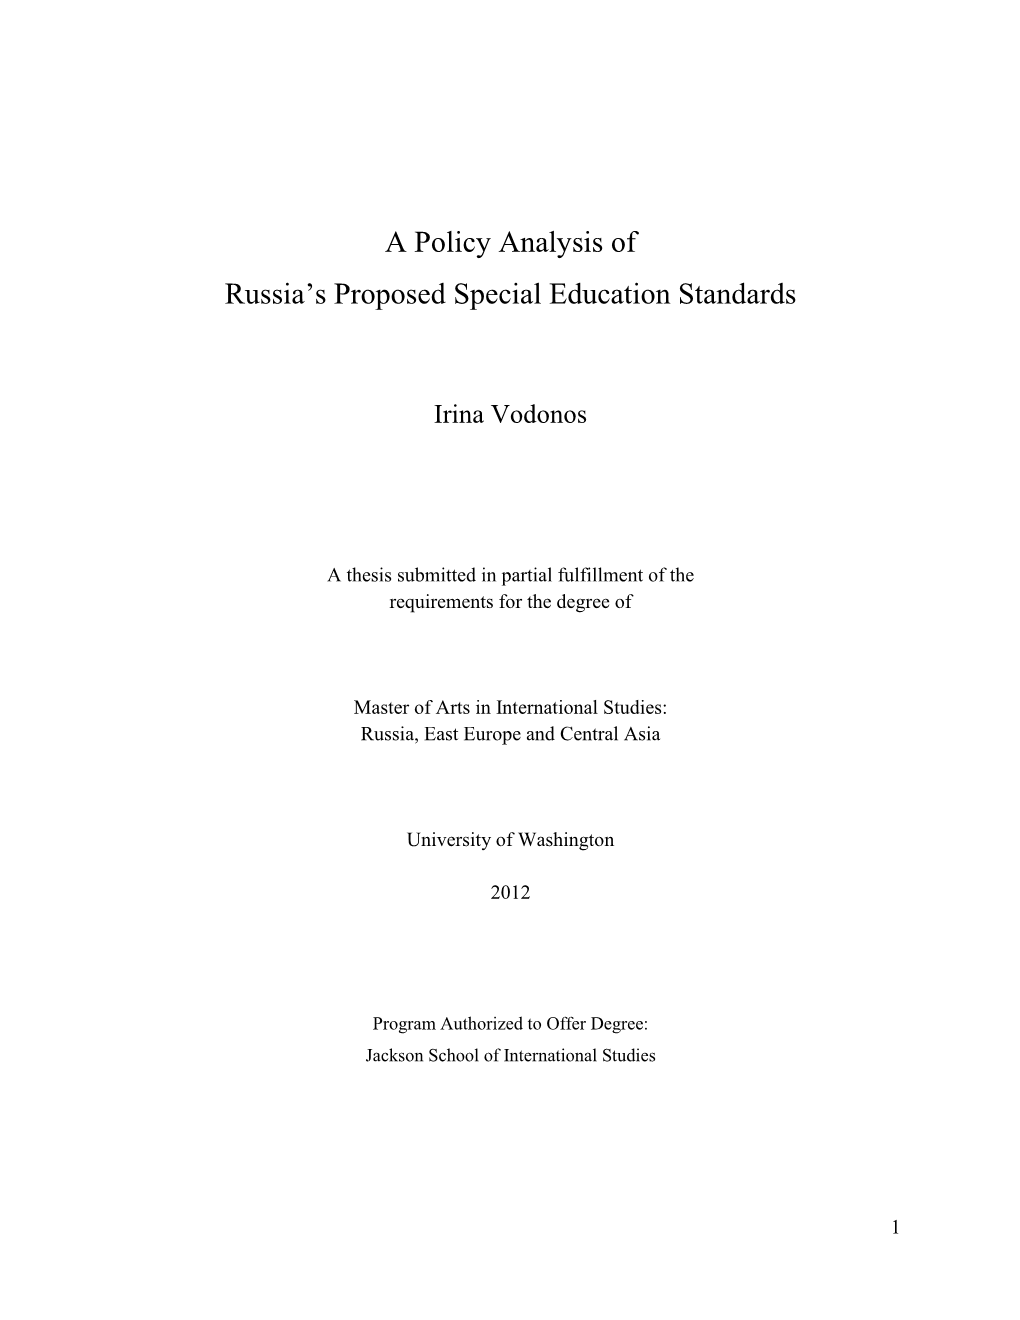 A Policy Analysis of Russia's Proposed Special Education